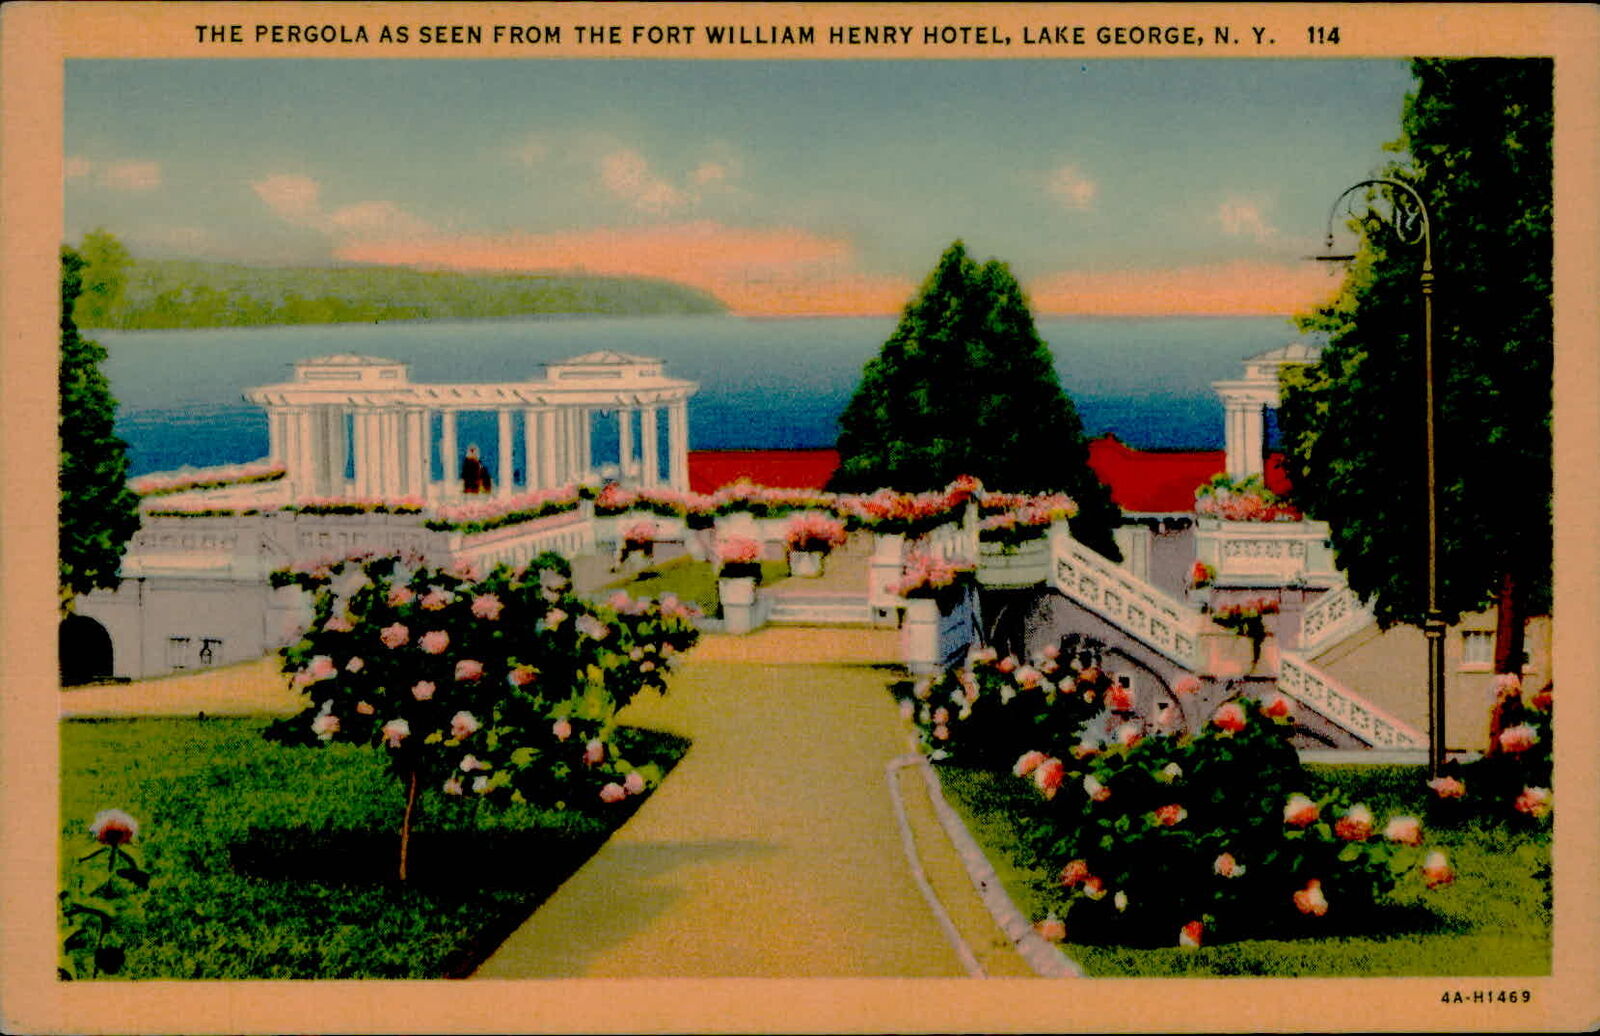 Postcard: THE PERGOLA AS SEEN FROM THE FORT WILLIAM HENRY HOTEL, LAKE